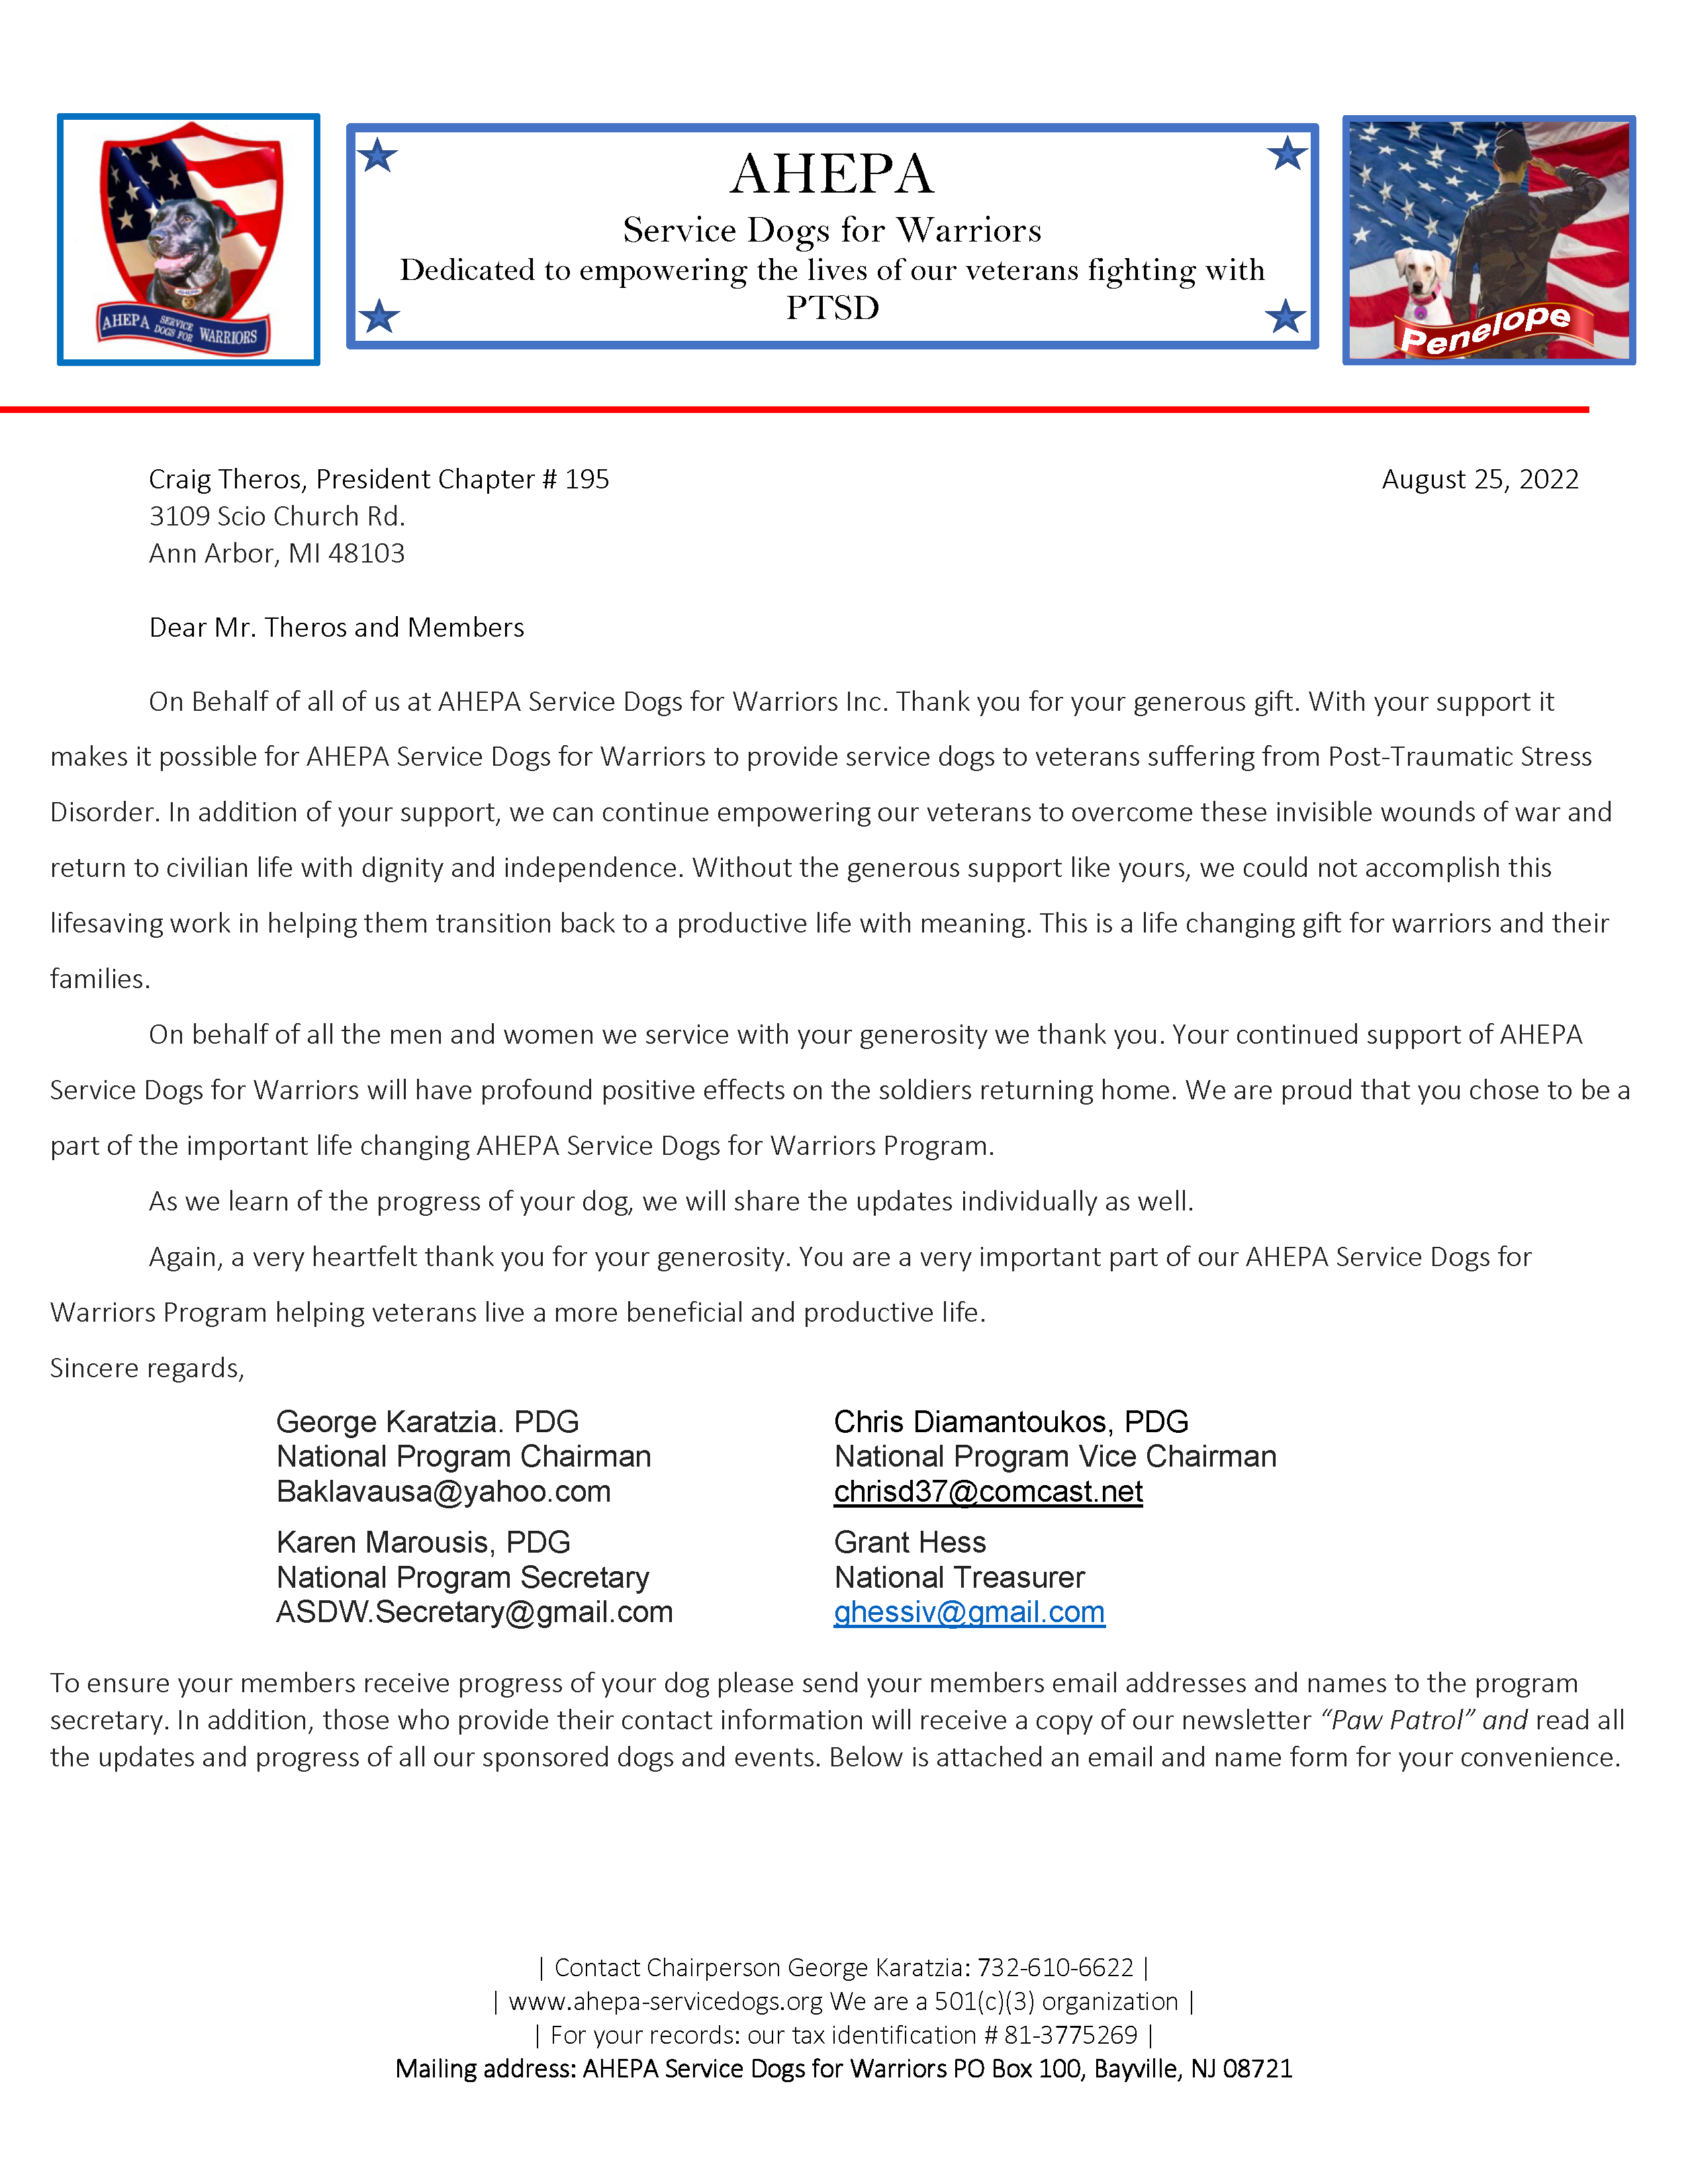 Boston AHEPA, AHEPA service Dogs for Warriors